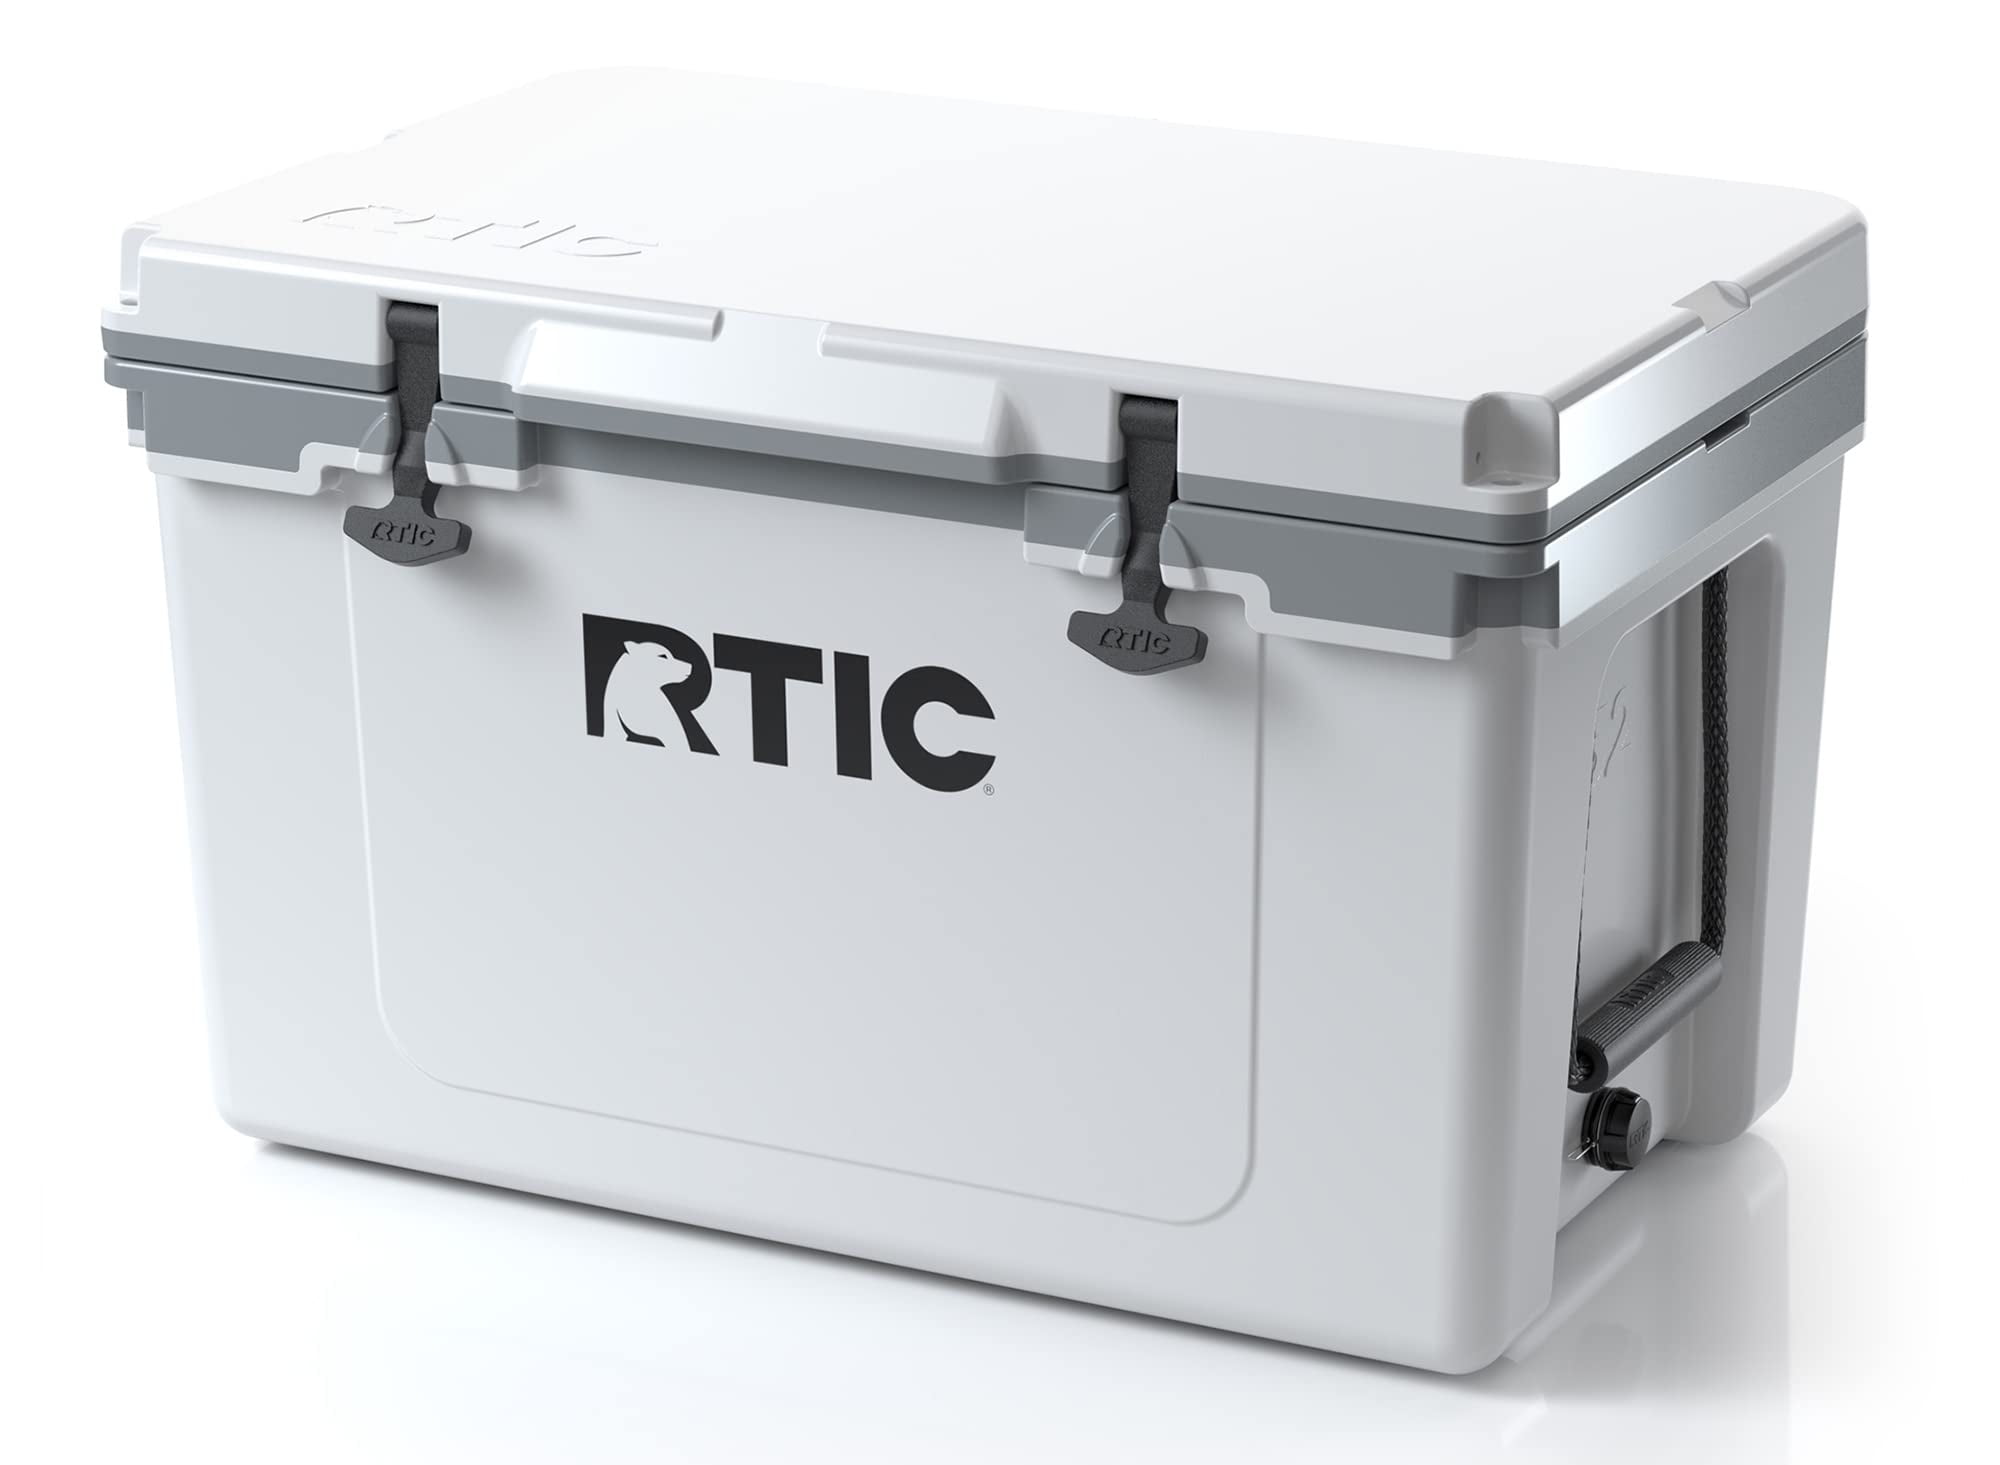 RTIC Ultra-Light Cooler Review - Man Makes Fire